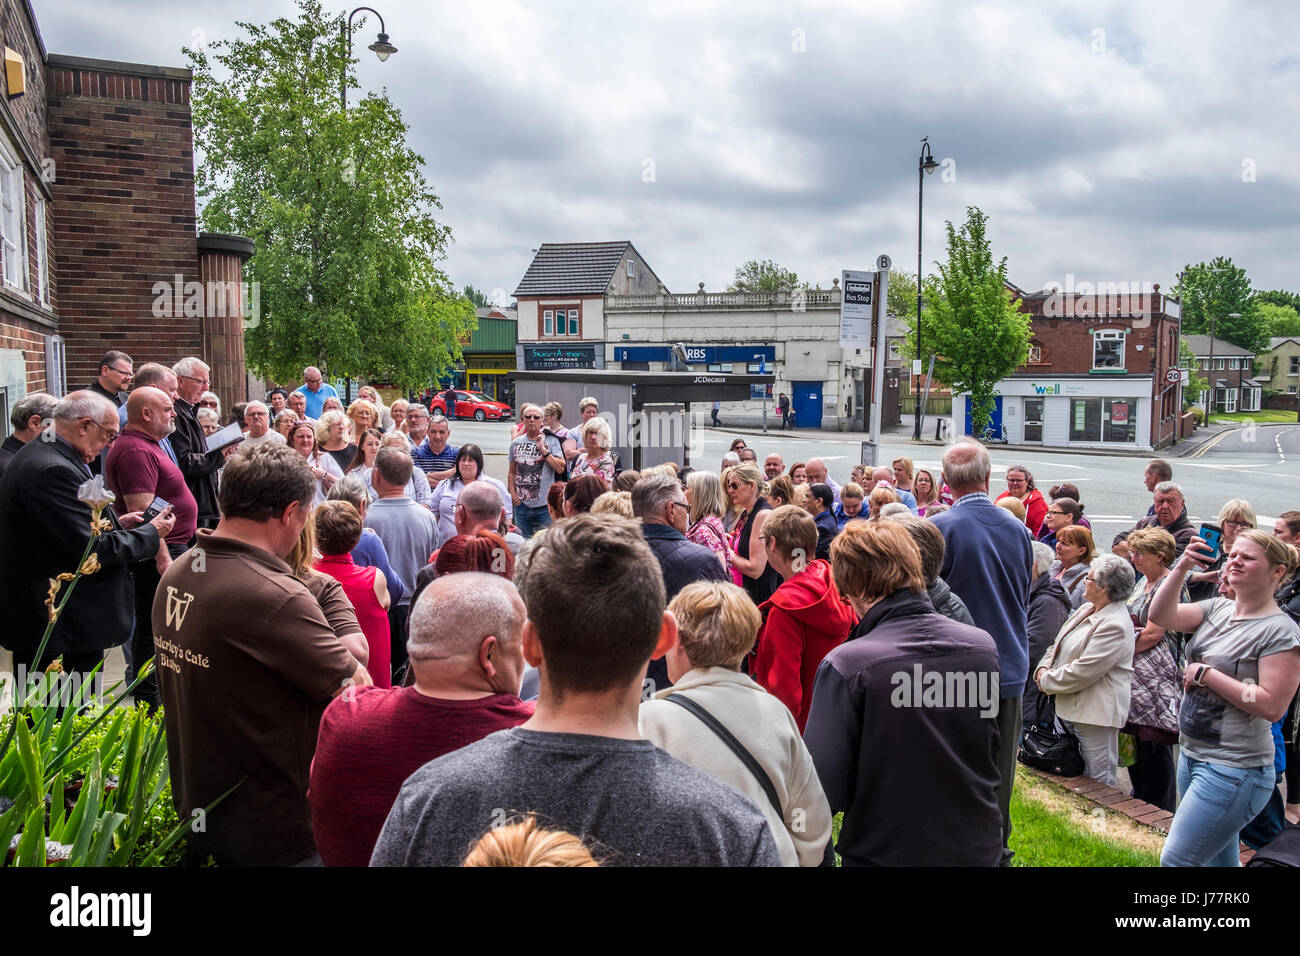 Little Lever, Bolton, England, 24th May 2017. Local priest leads members of the public in prayers for the victims and relatives of the Manchester bombing, local councillors, Sean Hornsby, Rees Gibbon, both Ukip members, Canon Ian Anthony. Members of the public, Local priest and UKIP councillors assemble to lead the general public in prayers for the family and victims of the recent Islamic State group bombing in the center of Manchester. Mike Hesp/ Alamy Live News. Stock Photo